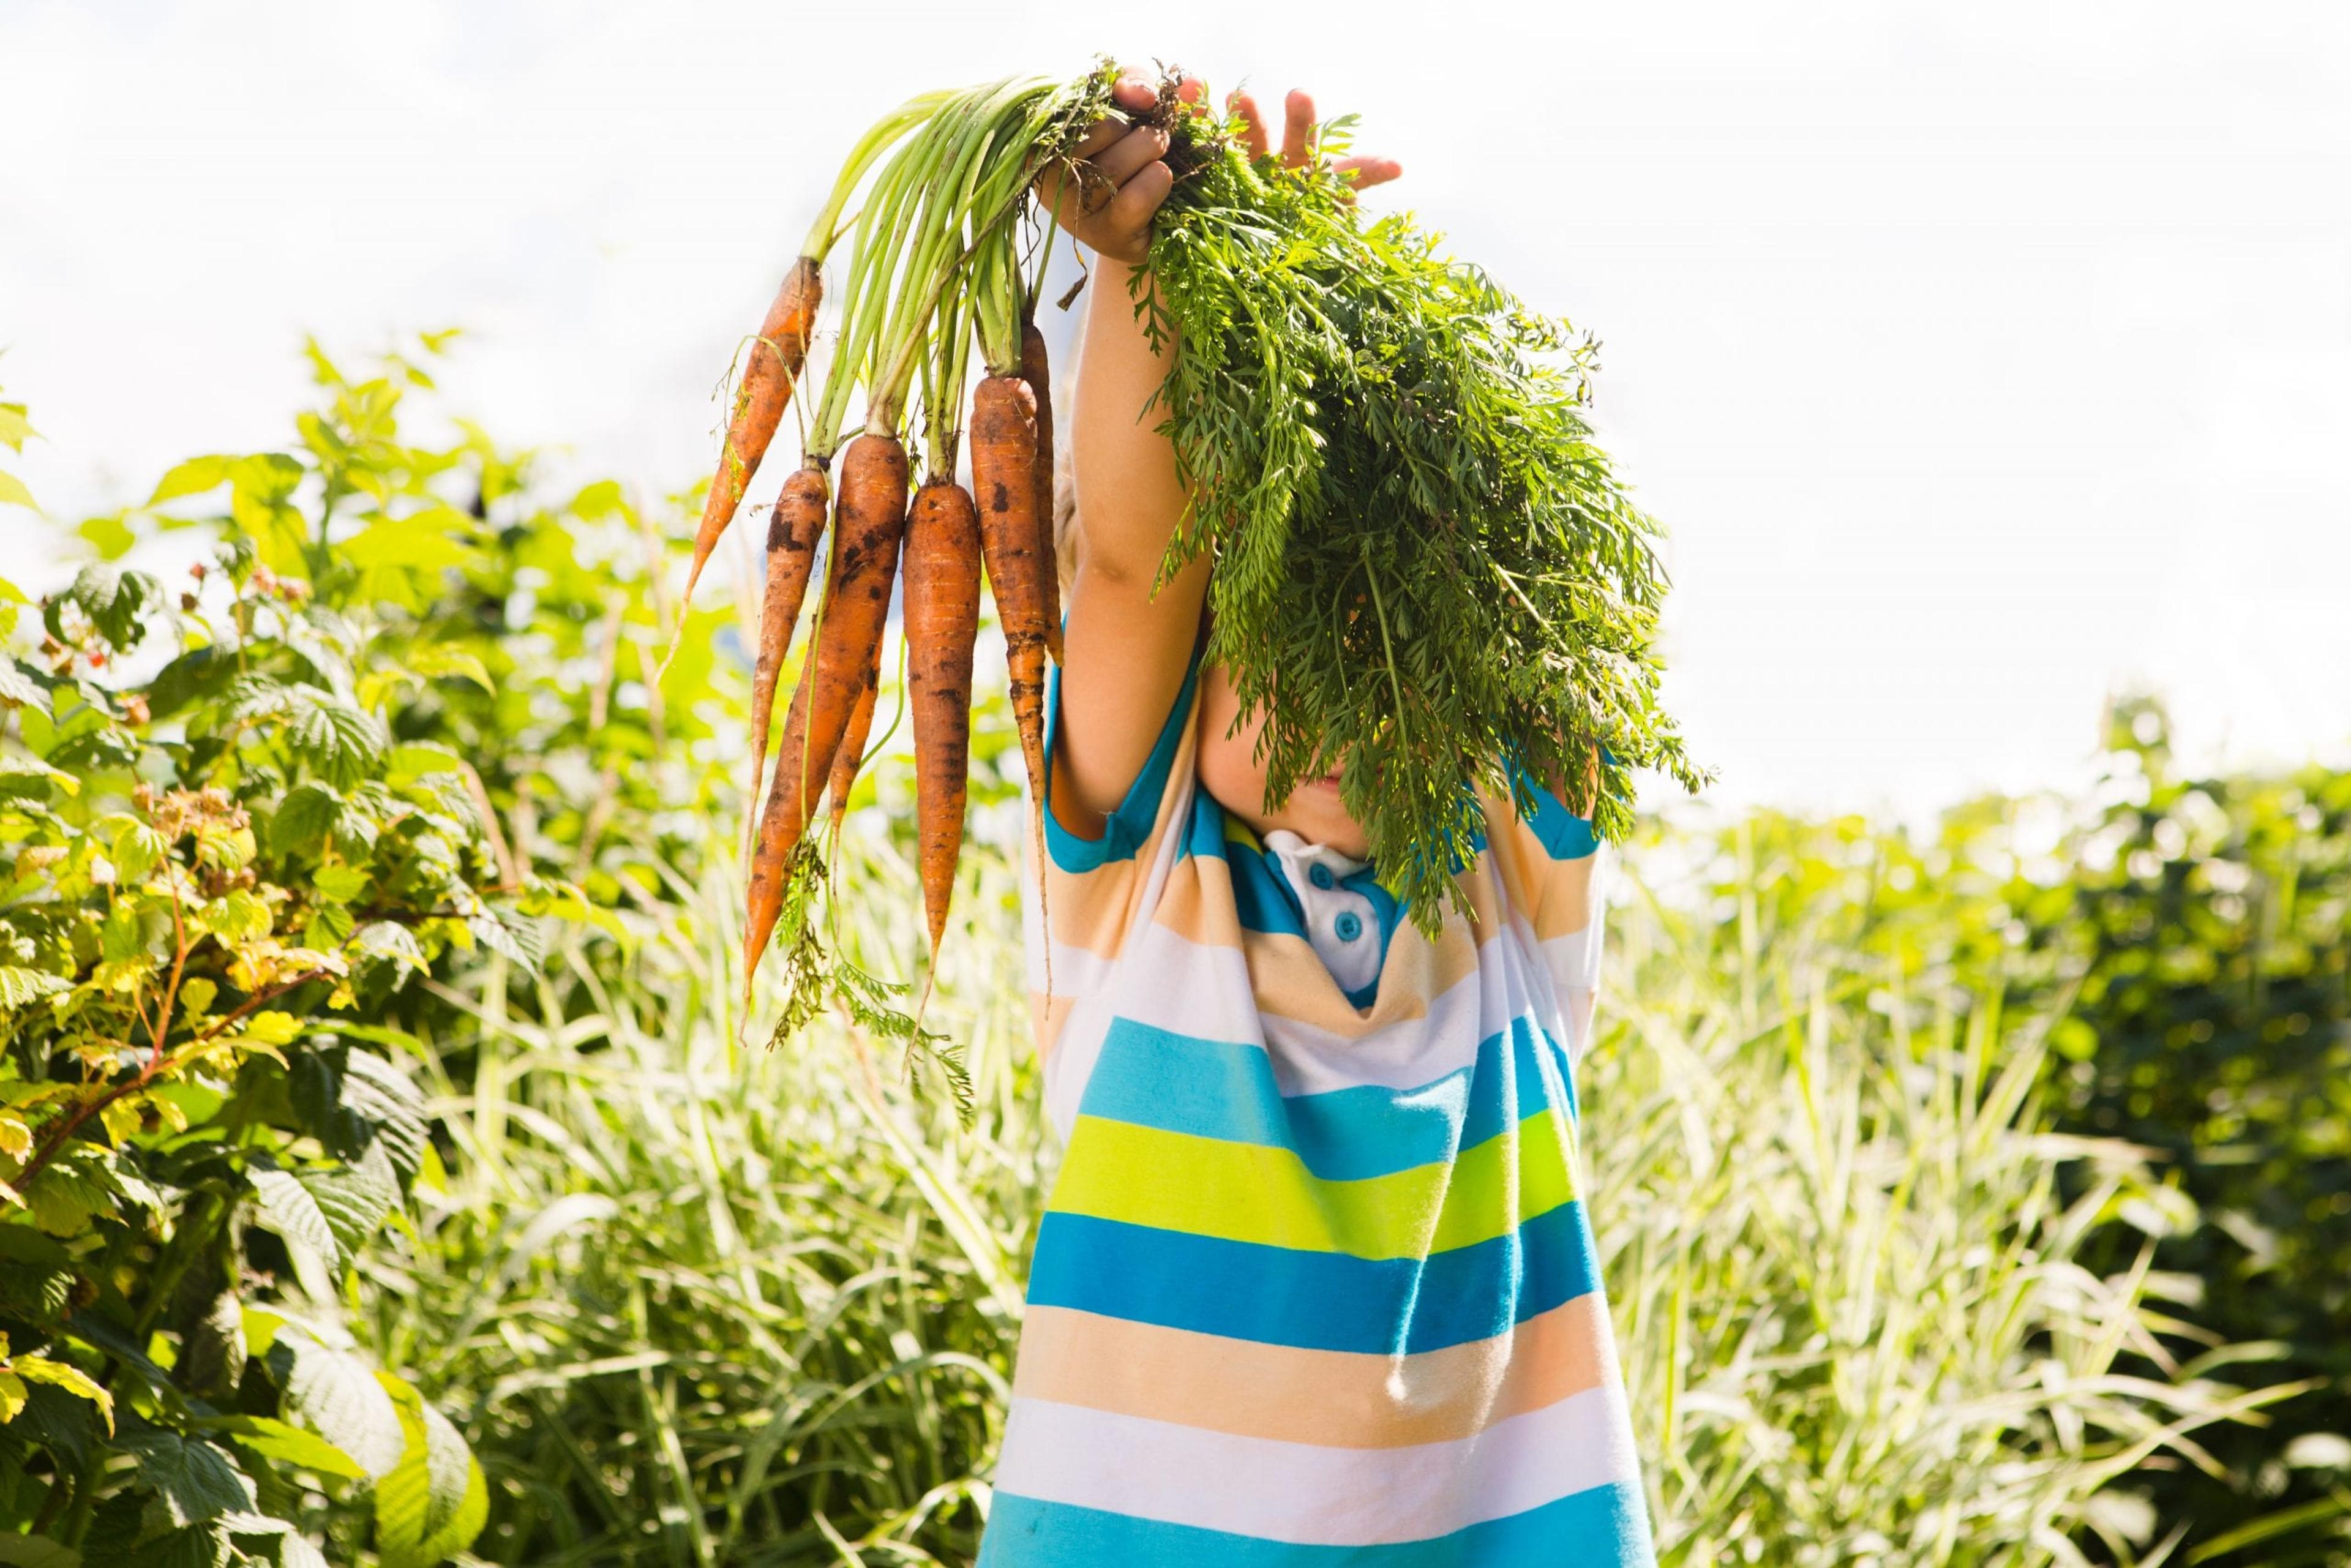 Boy holding large bunch of fresh carrots up over his face outdoors at a farm